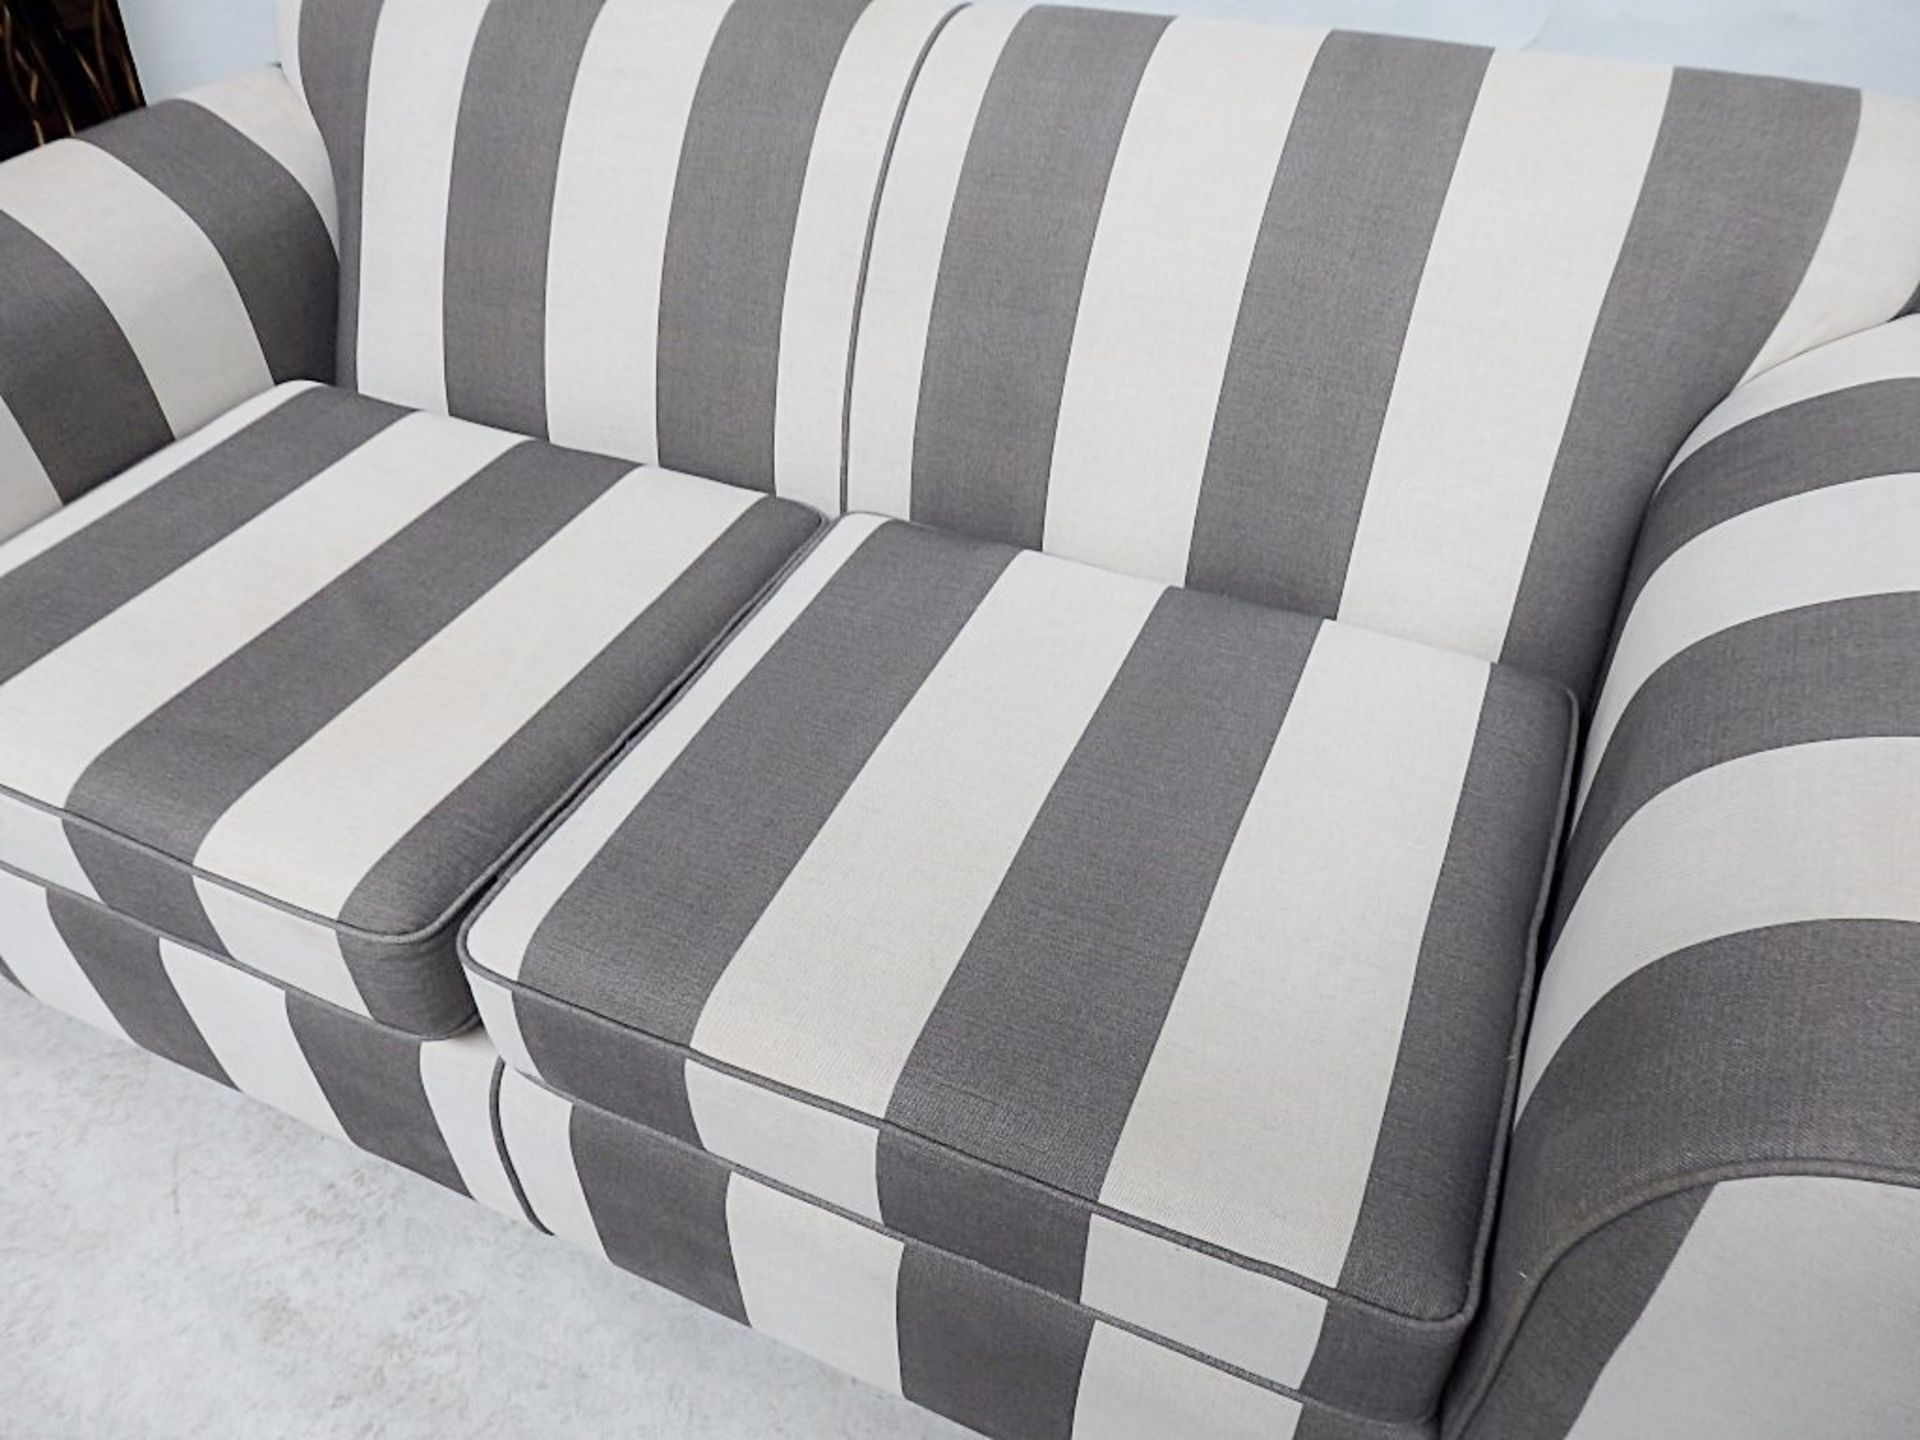 1 x Sumptuous Bespoke Cream & Grey Striped Sofa - Expertly Built And Upholstered By British - Image 2 of 6